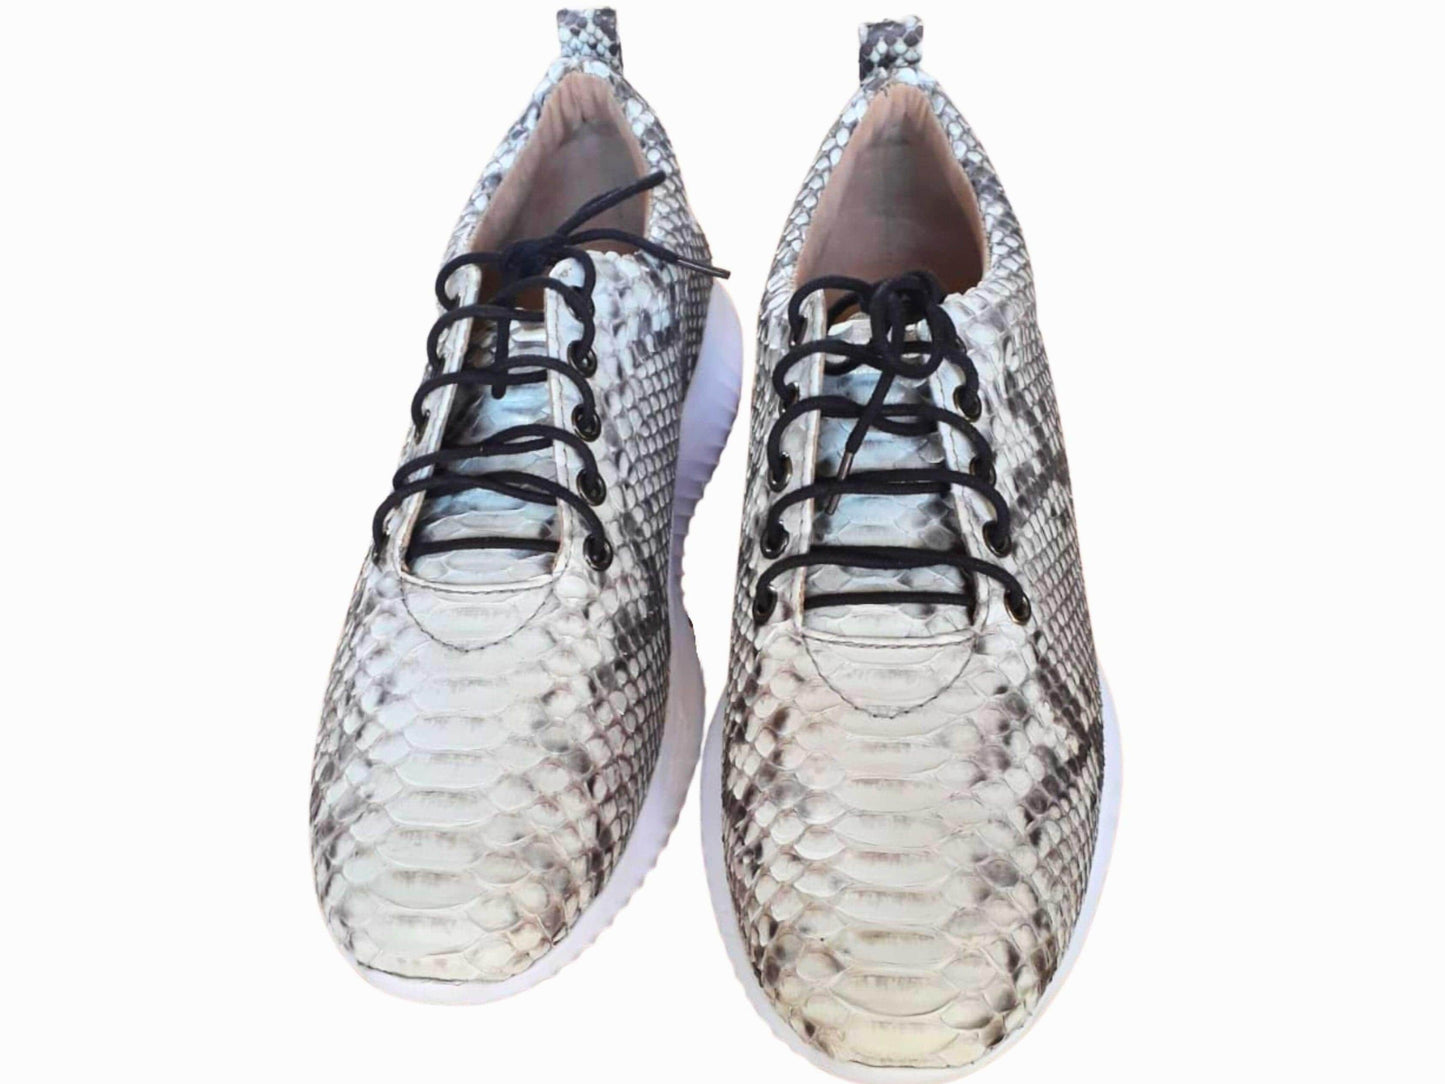 Shoes Snakeskin Lace-up Sneaker Shoes Python Jacket by LFM Fashion